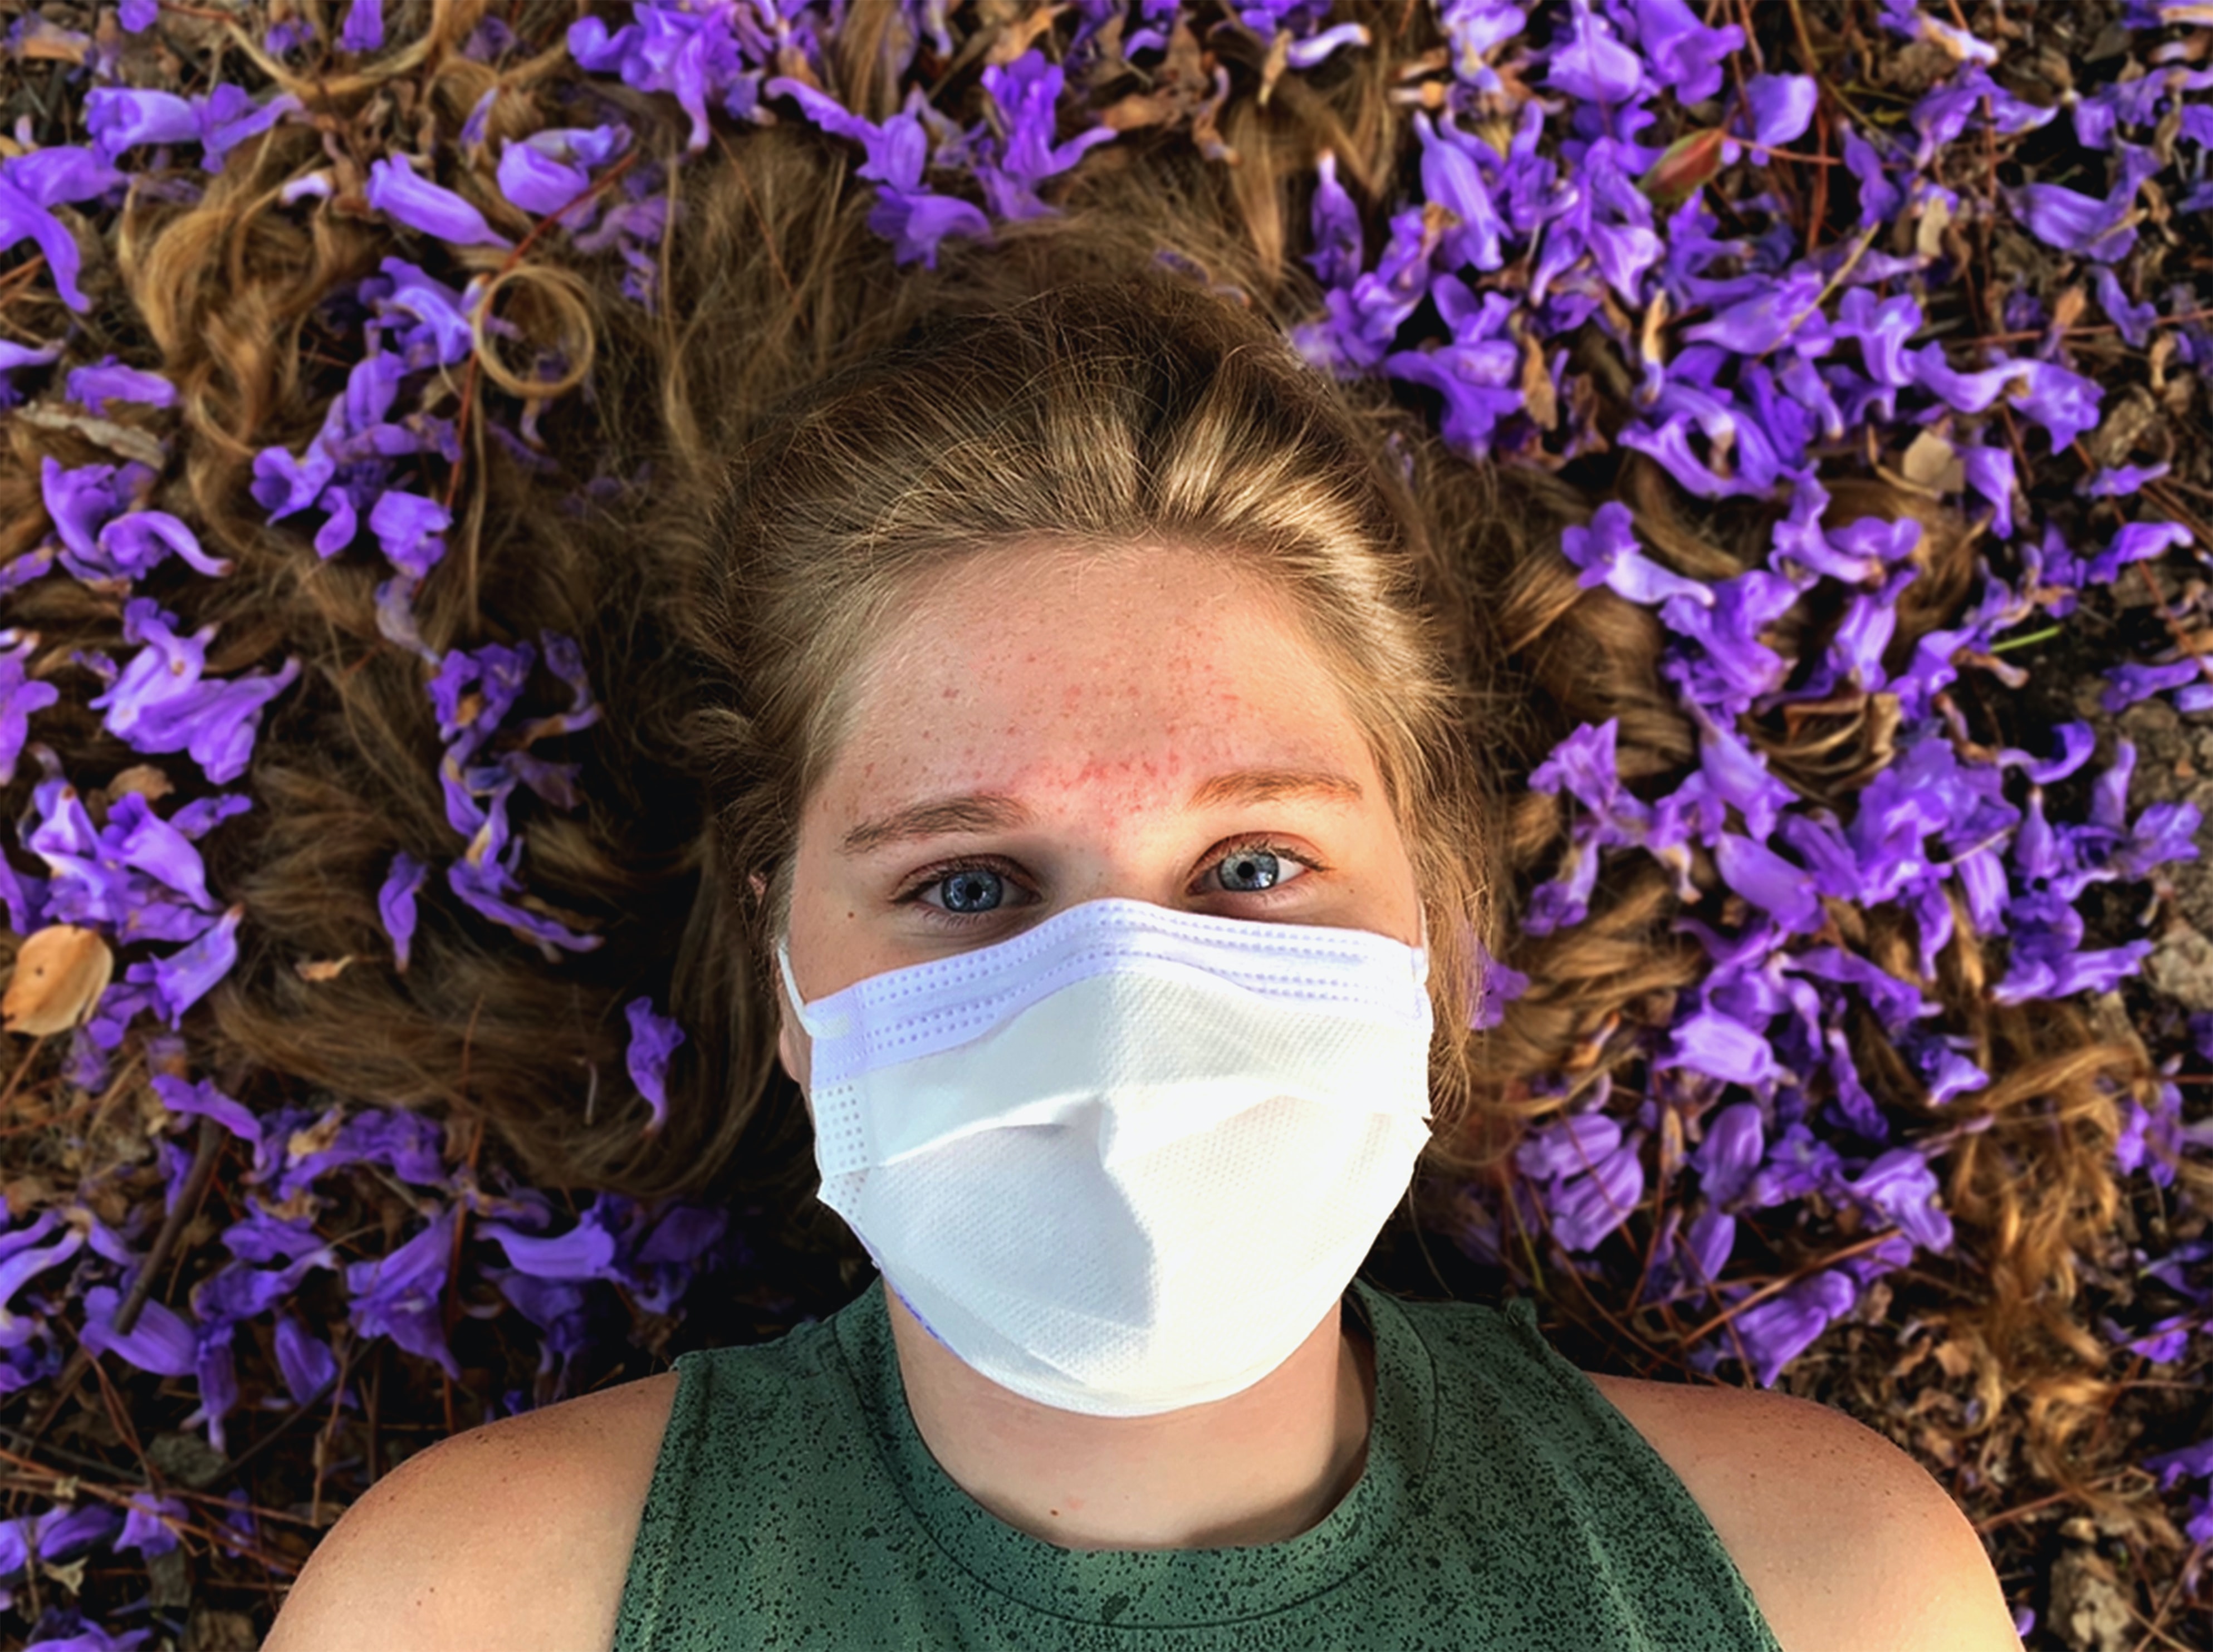 A young woman lays in a bed of purple flowers with her hair splayed out around her head. She is wearing a green, sleeveless top and a white mask. 